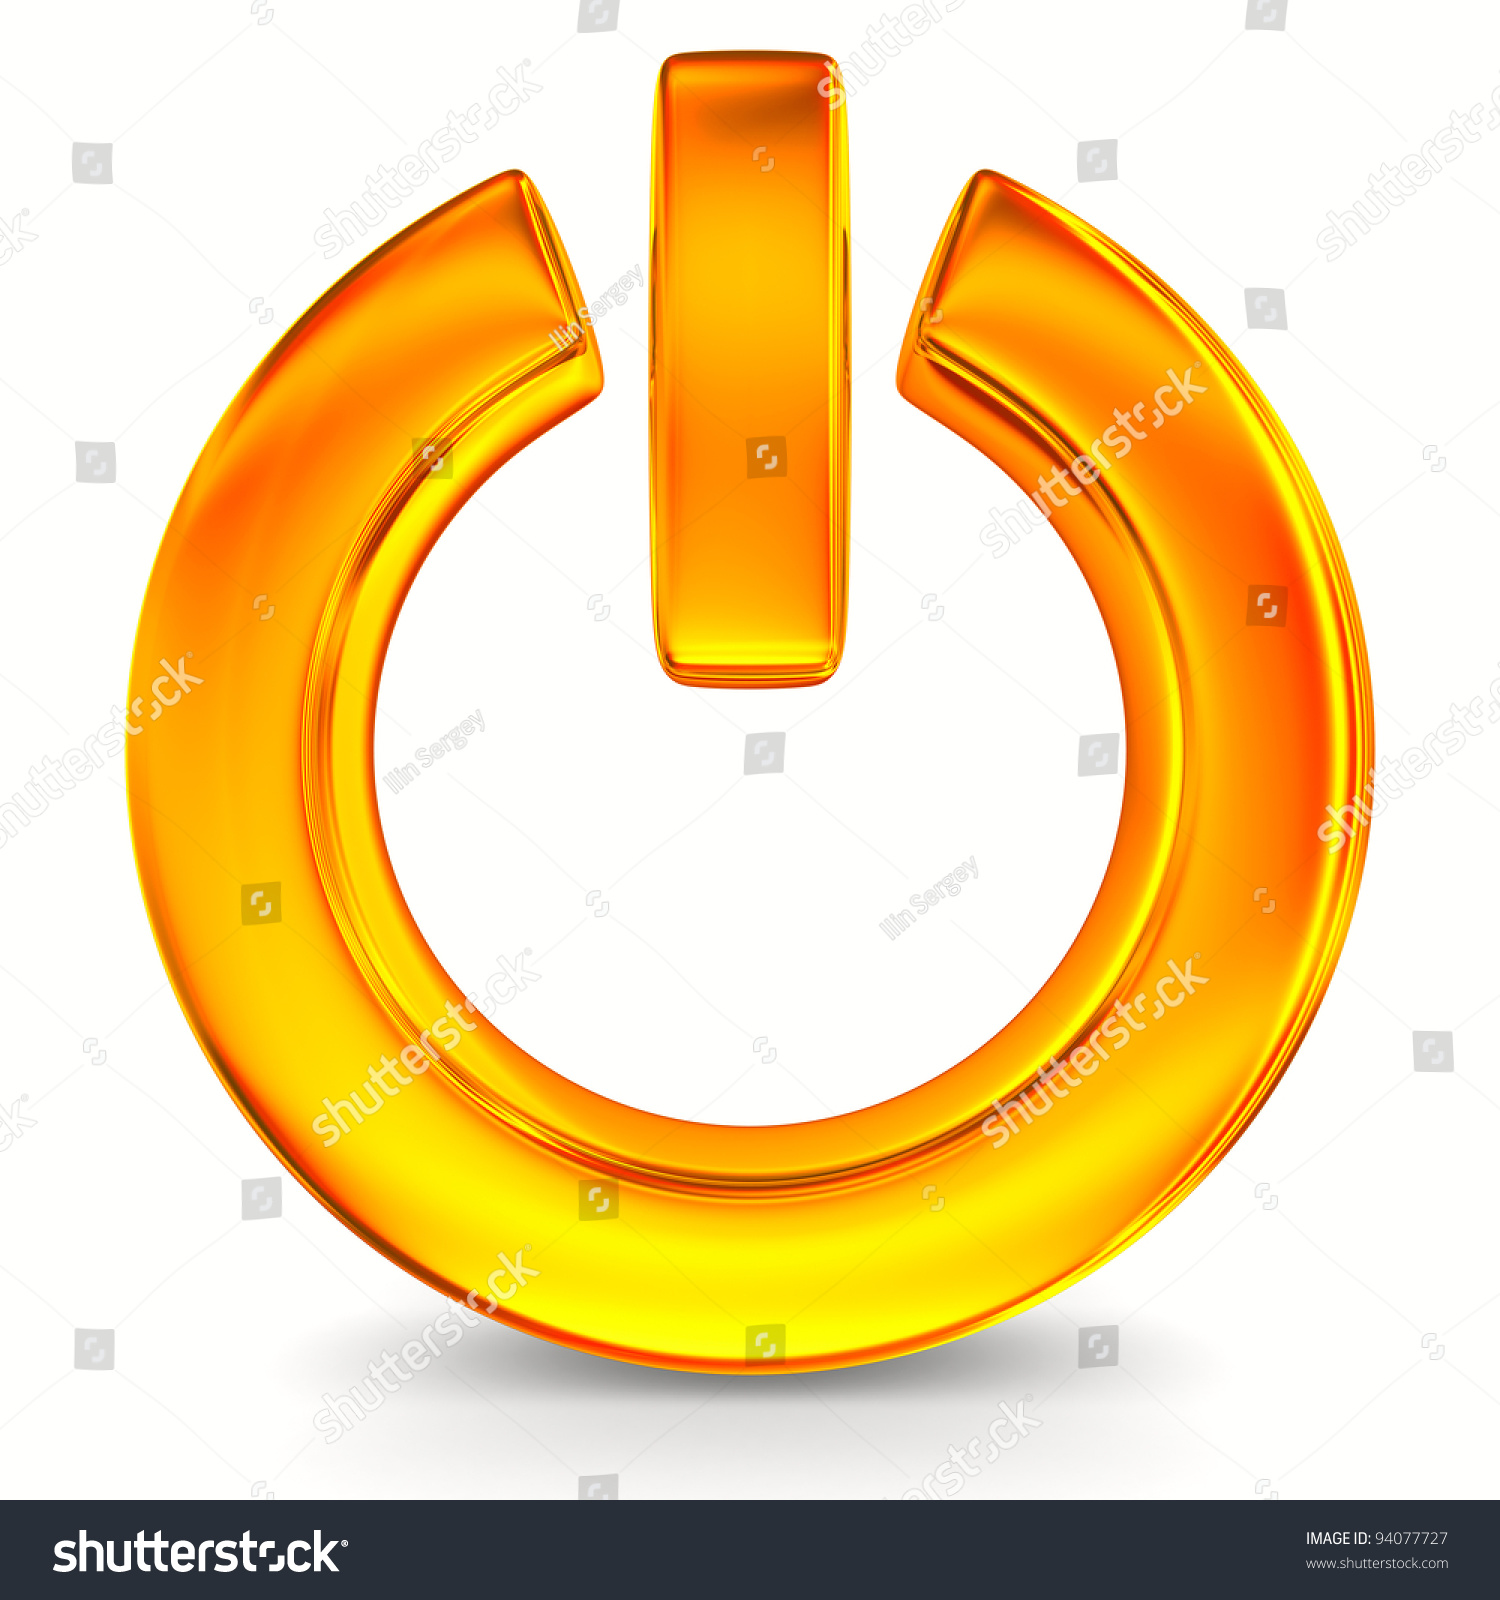 Power Sign On White Background. Isolated 3d Image Stock Photo 94077727